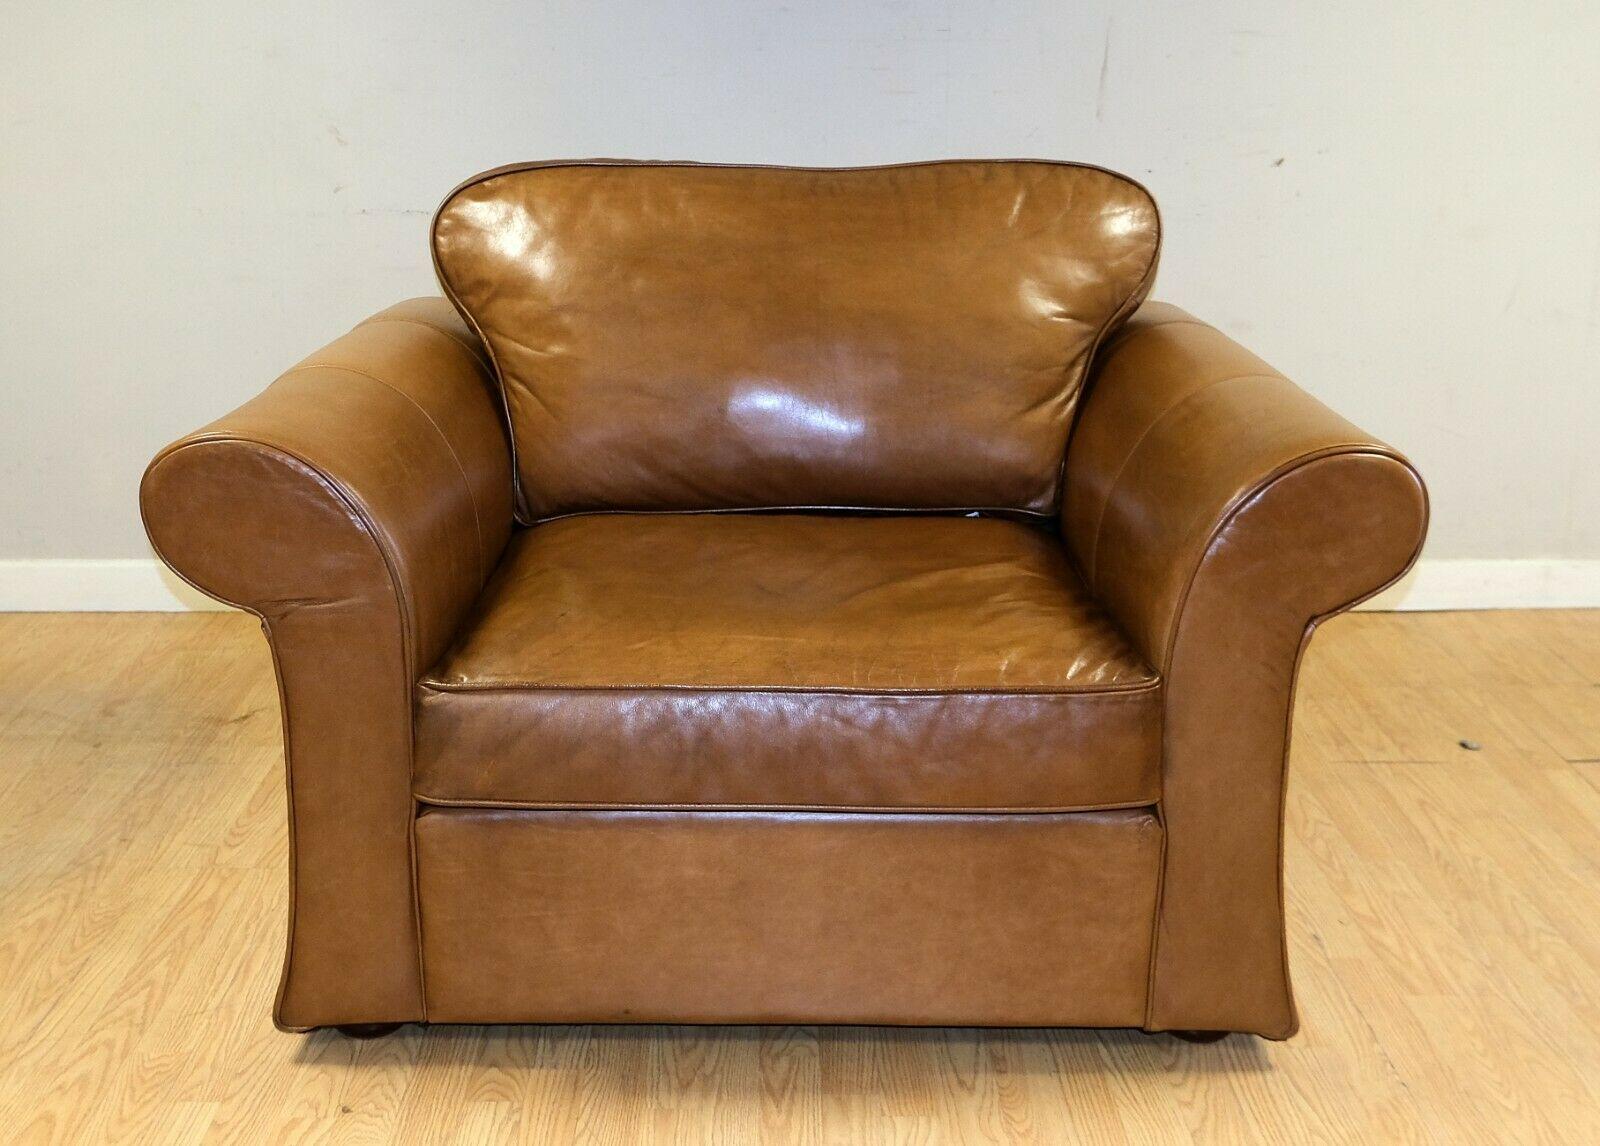 We are delighted to offer for sale this lovely leather armchair in a lovely light brown colour.

This comfortable and solid armchair is presented in a nice soft colour along with real leather. The curved arms are simple and at the same time, with